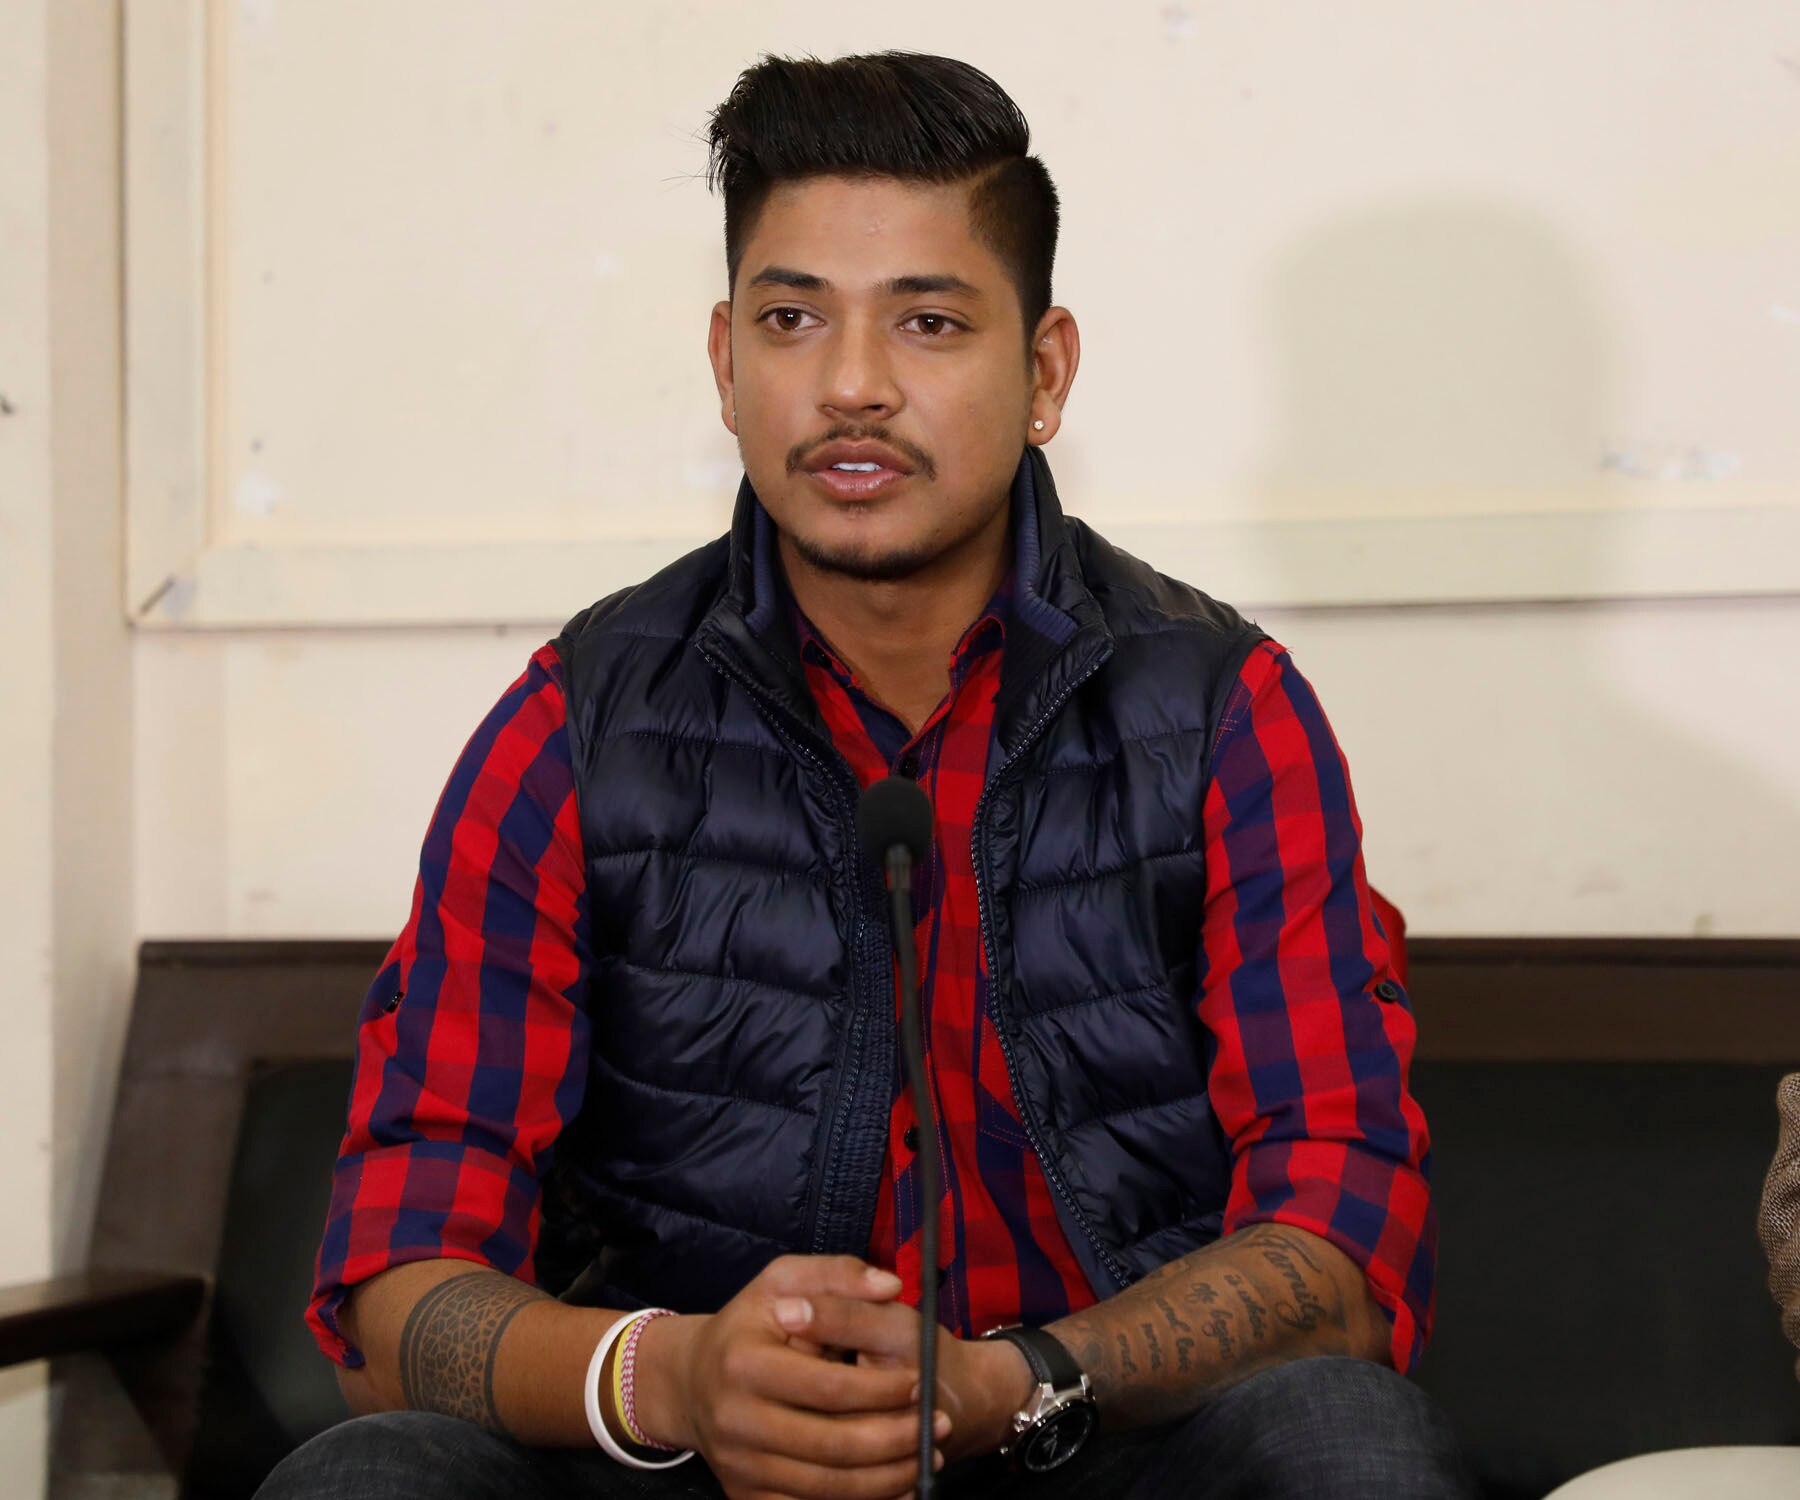 Sandeep Lamichhane before going to play his second season of Indian premier league cricket.